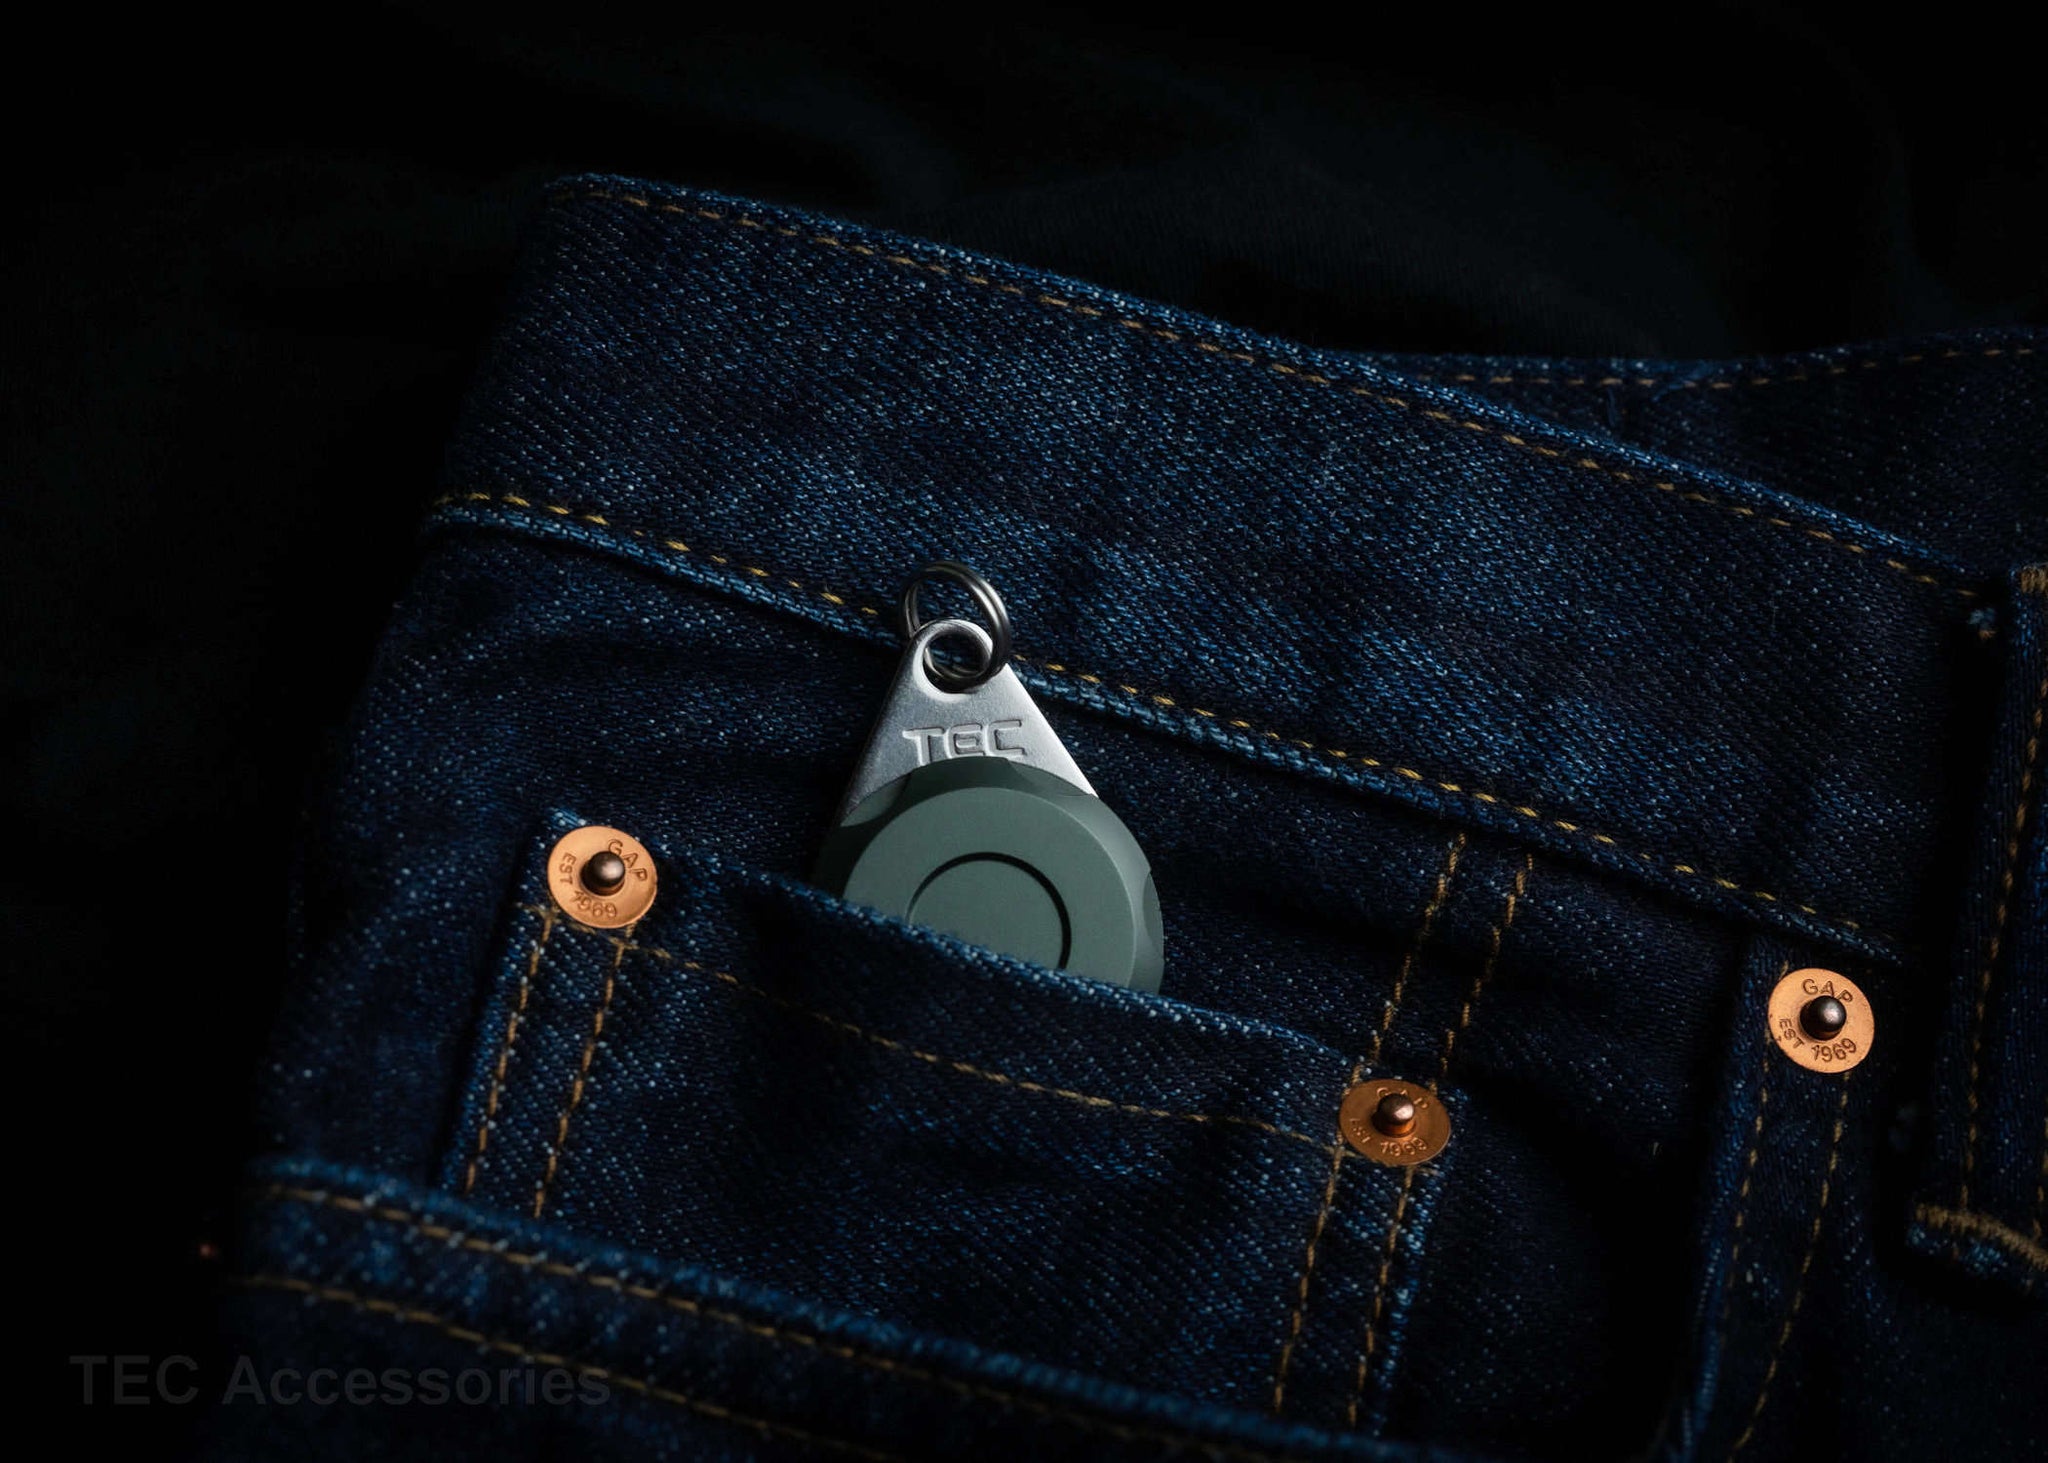 Micro-Vault in jeans pocket